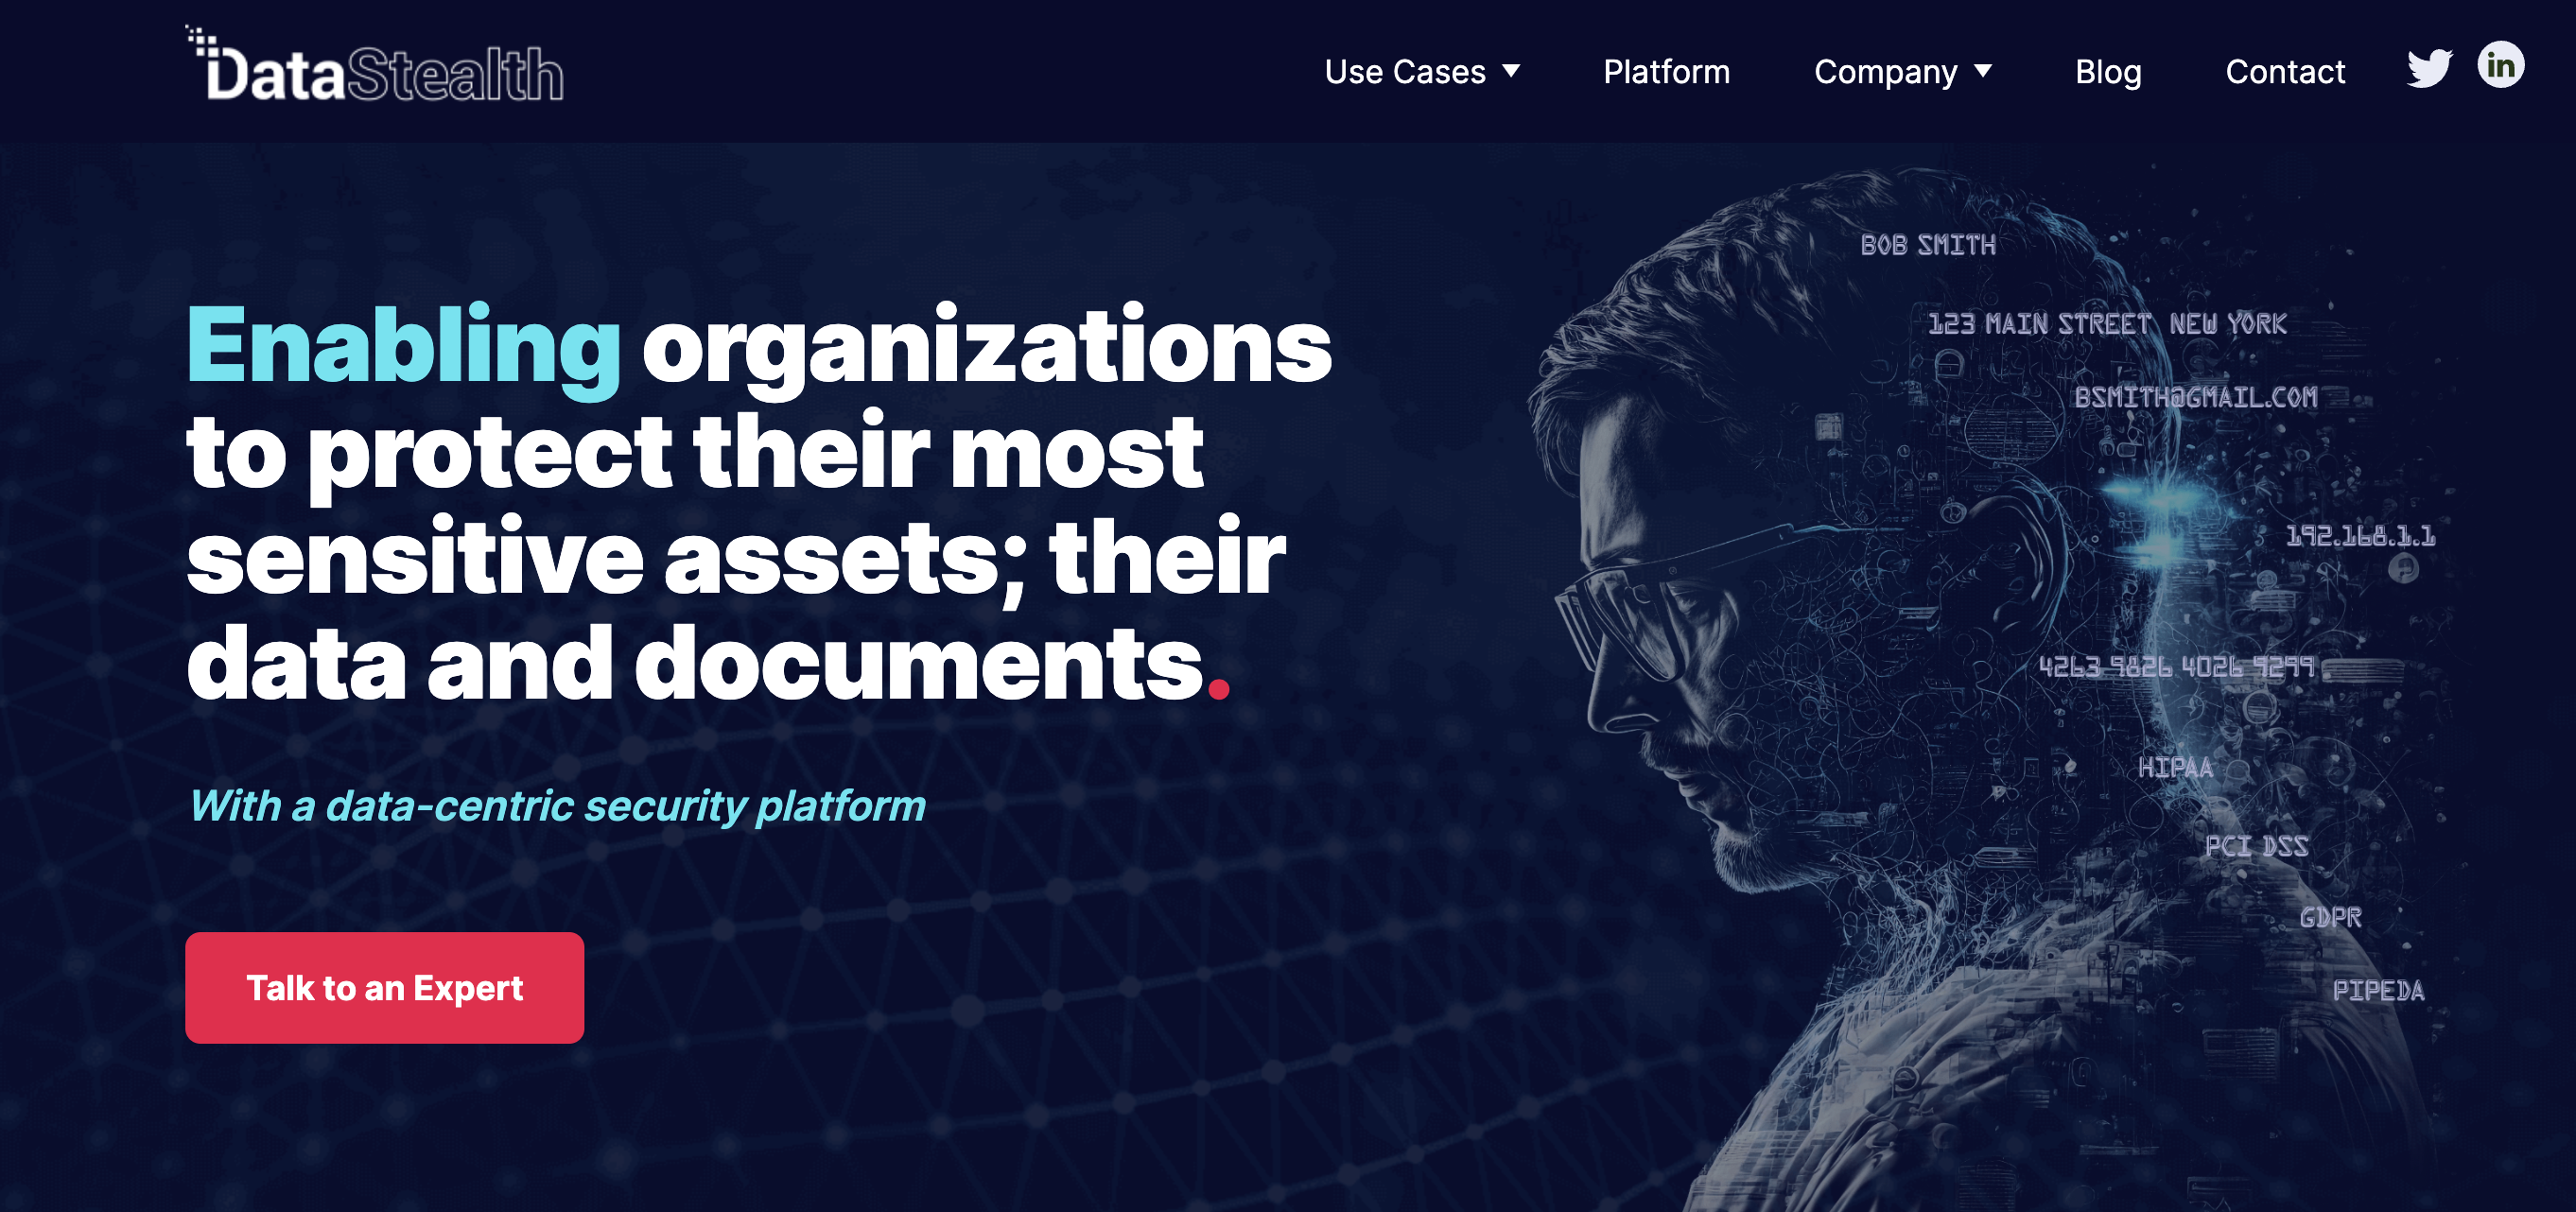 DataStealth: Enabling organizations to protect their most sensitive assets; their data and documents.